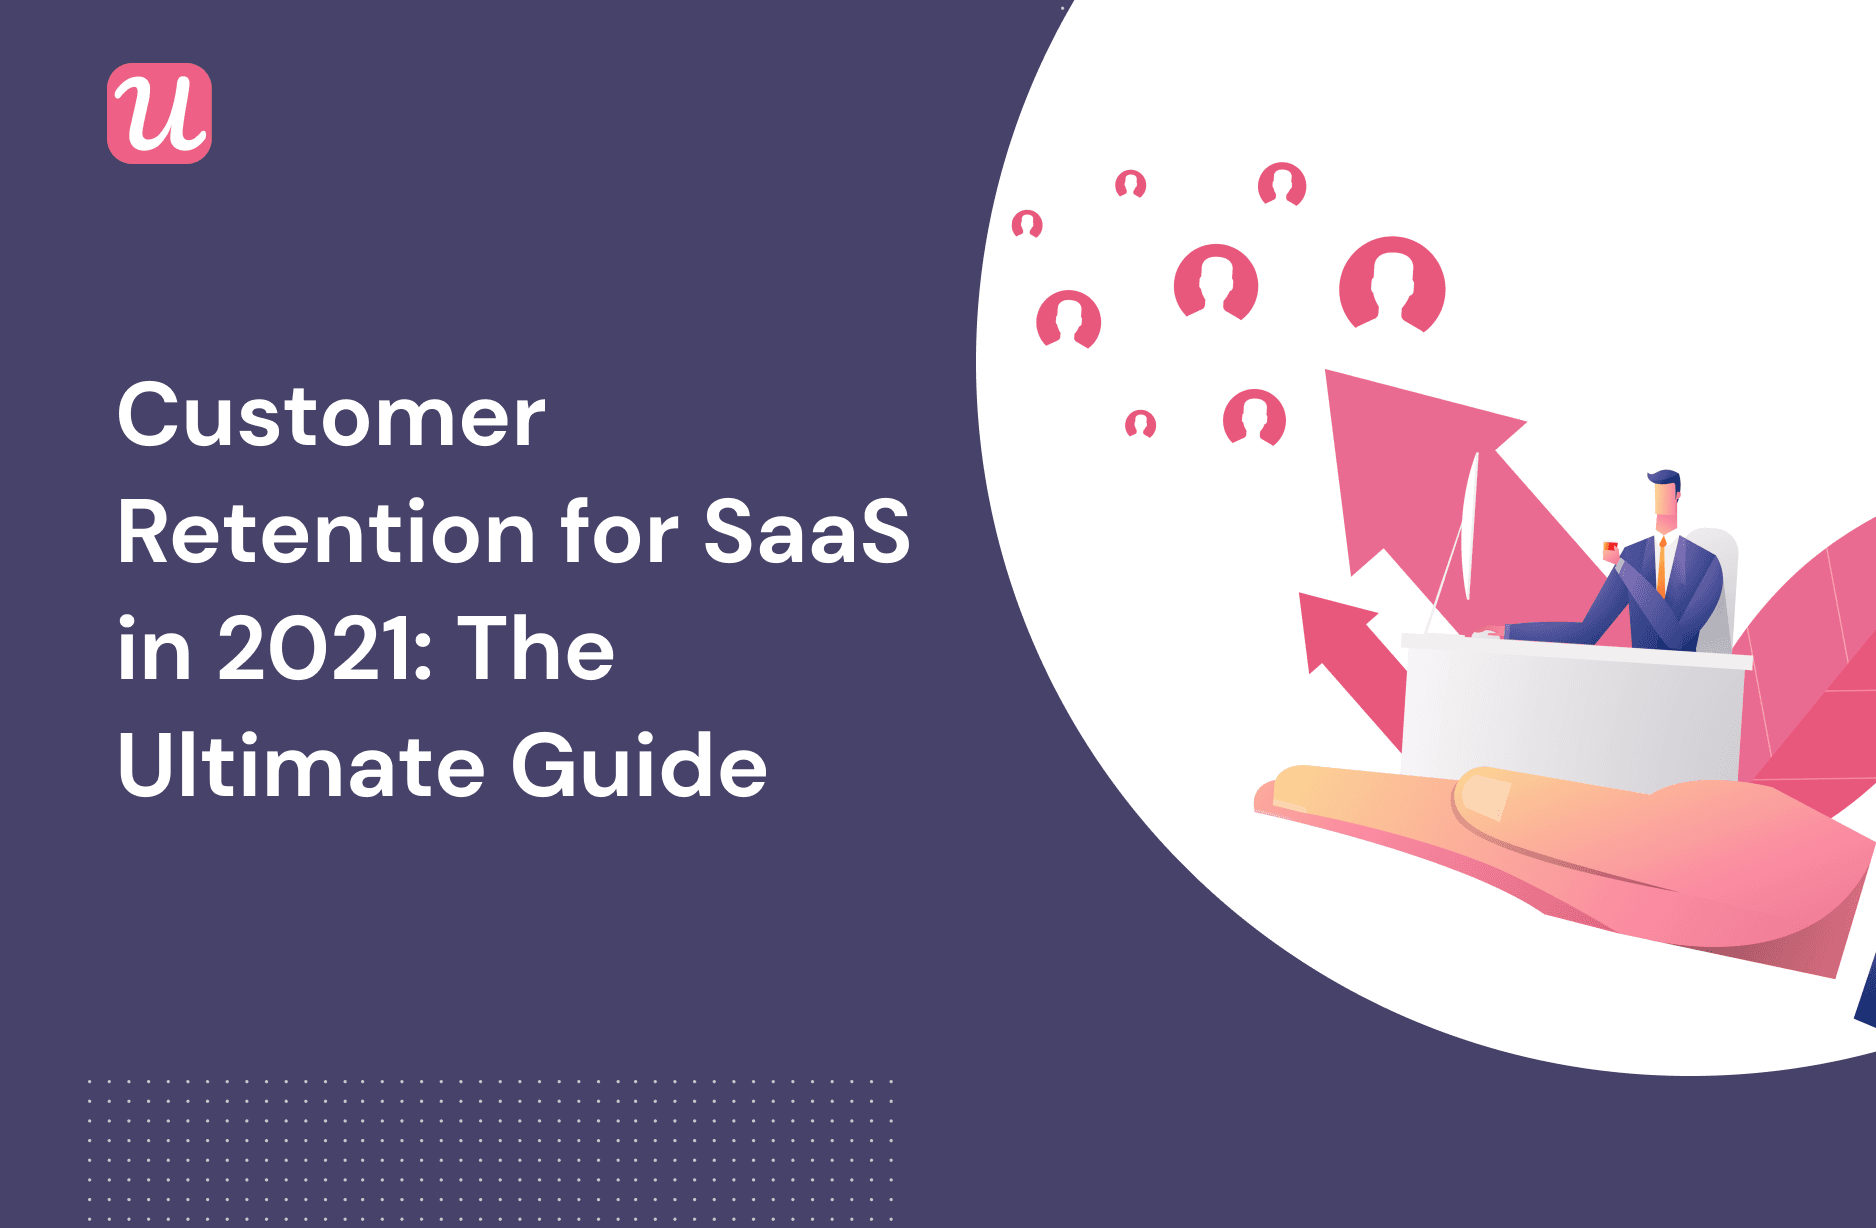 Customer Retention For SaaS in 2021: The Ultimate Guide